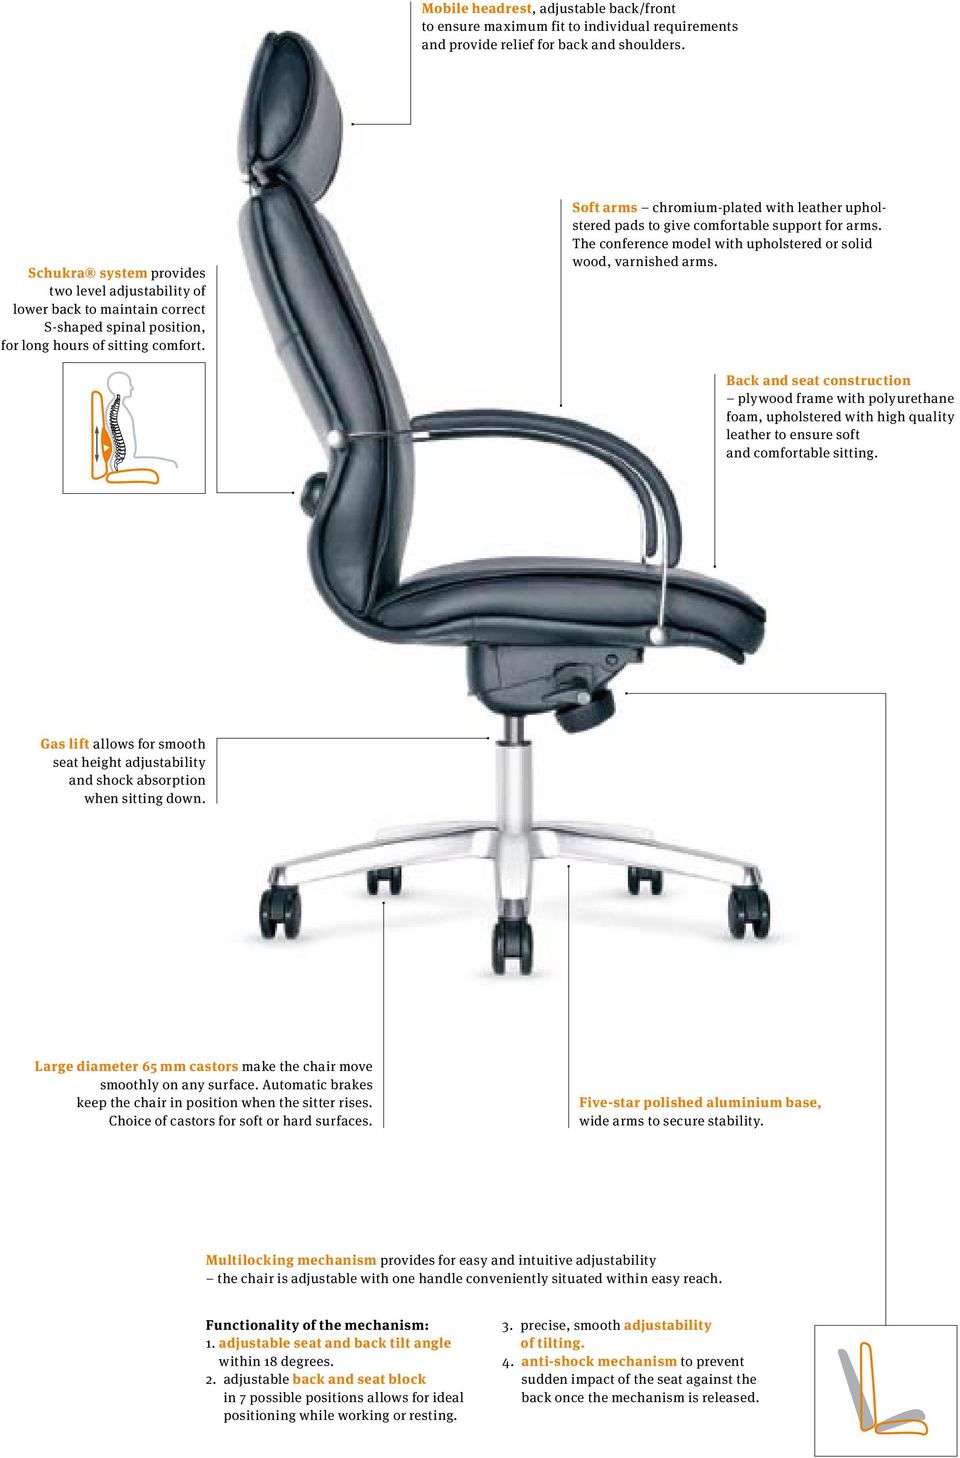 Soft arms chromium-plated with leather upholstered pads to give comfortable support for arms. The conference model with upholstered or solid wood, varnished arms.